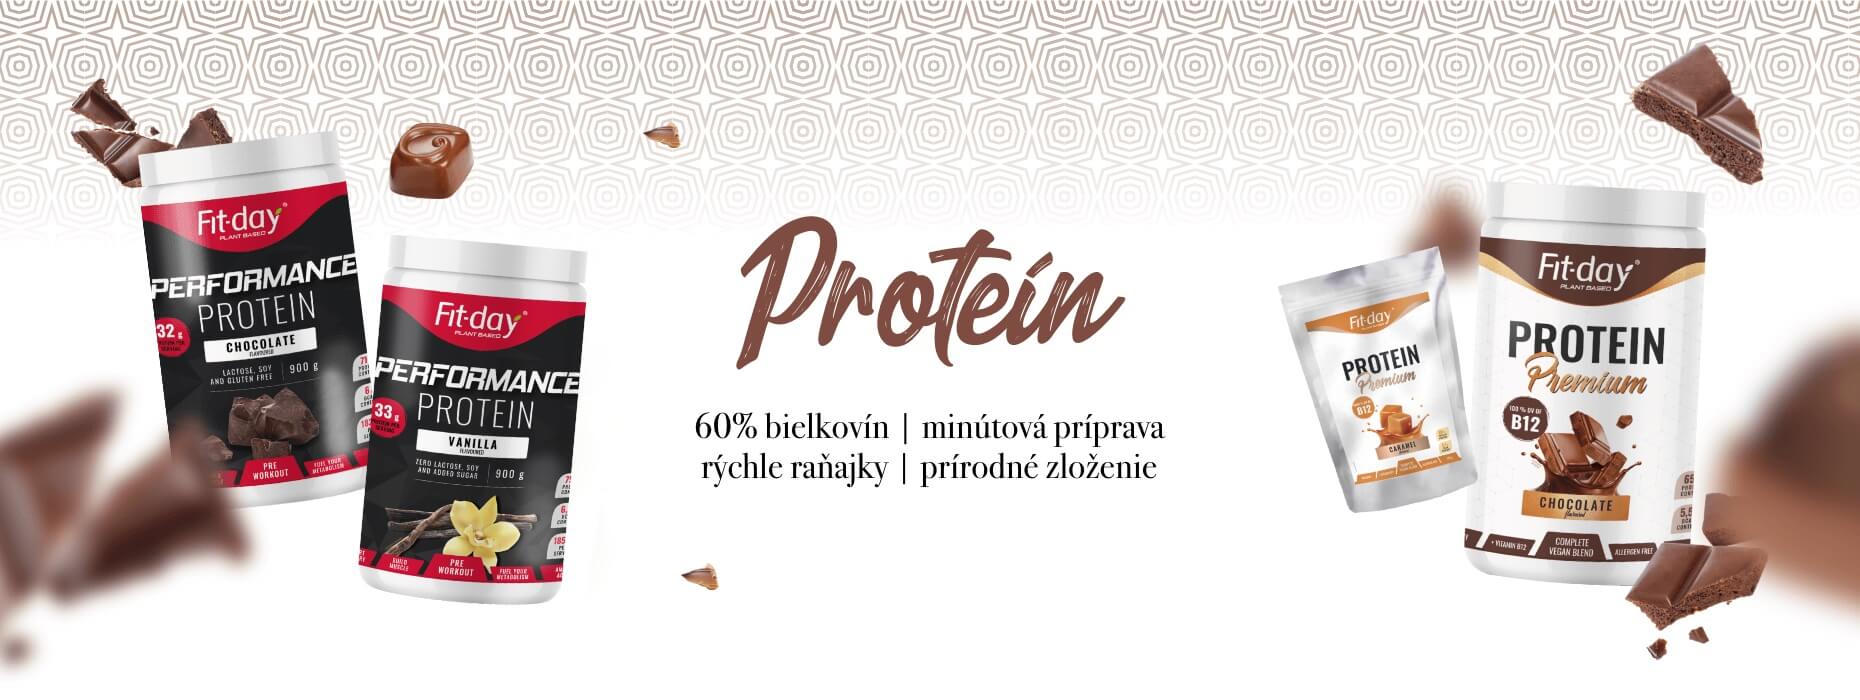 protein_1860x700_sk